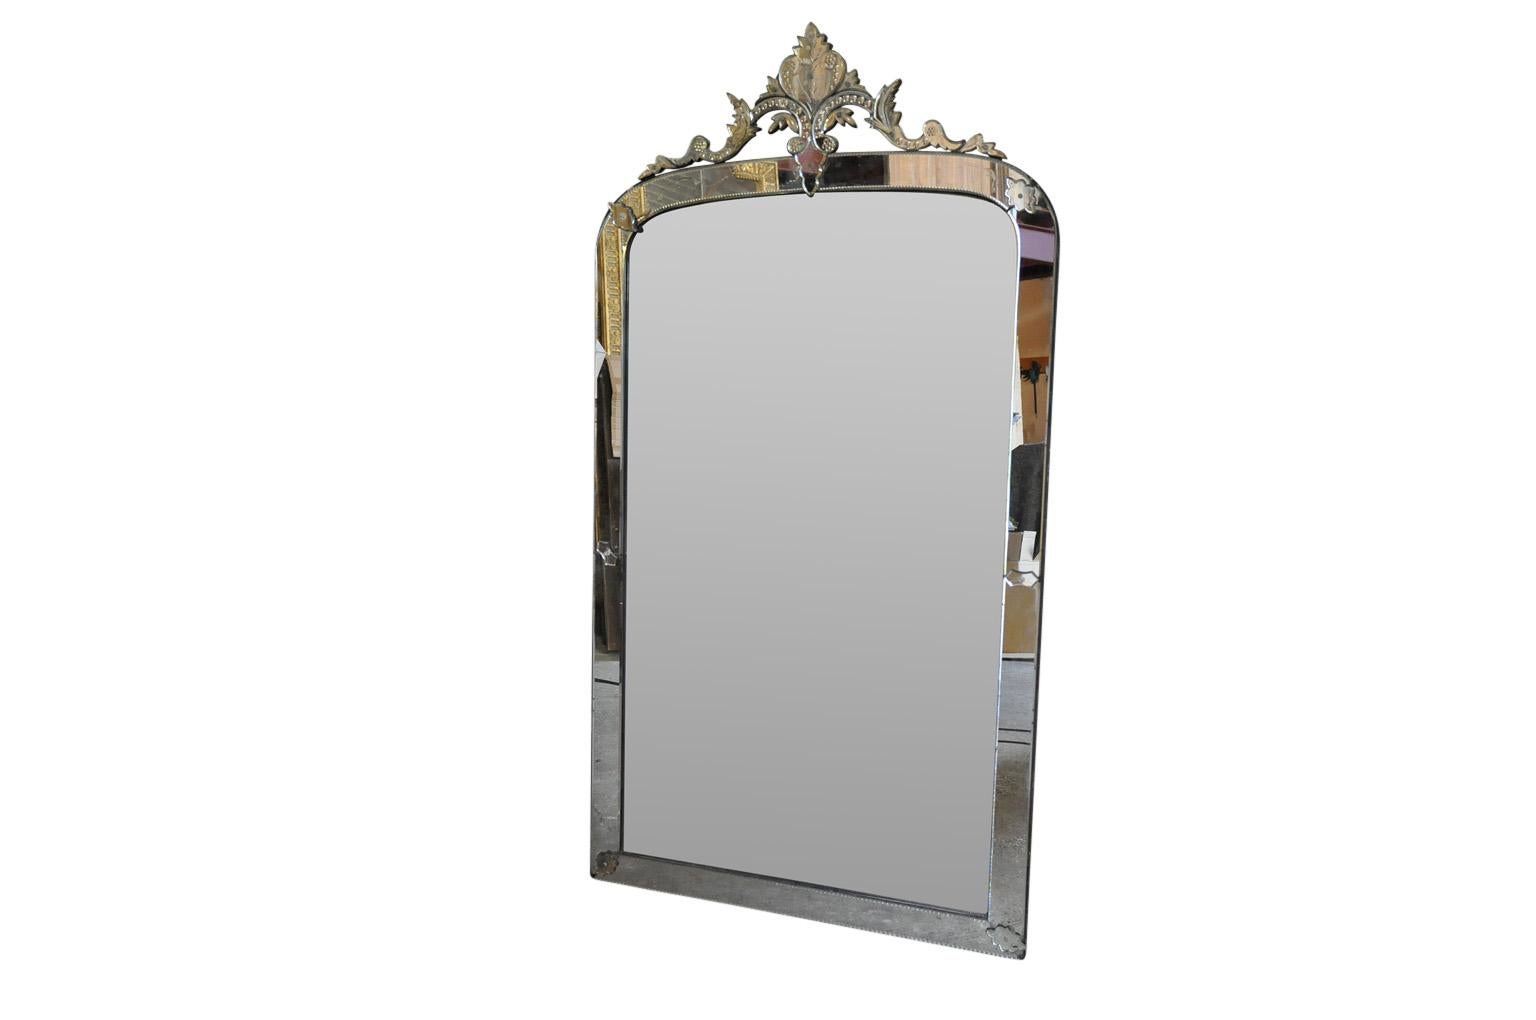 A stunning and grand scale 19th century Venetian mirror. Elegantly minimalist and very chic. A wonderful accent for any living area.